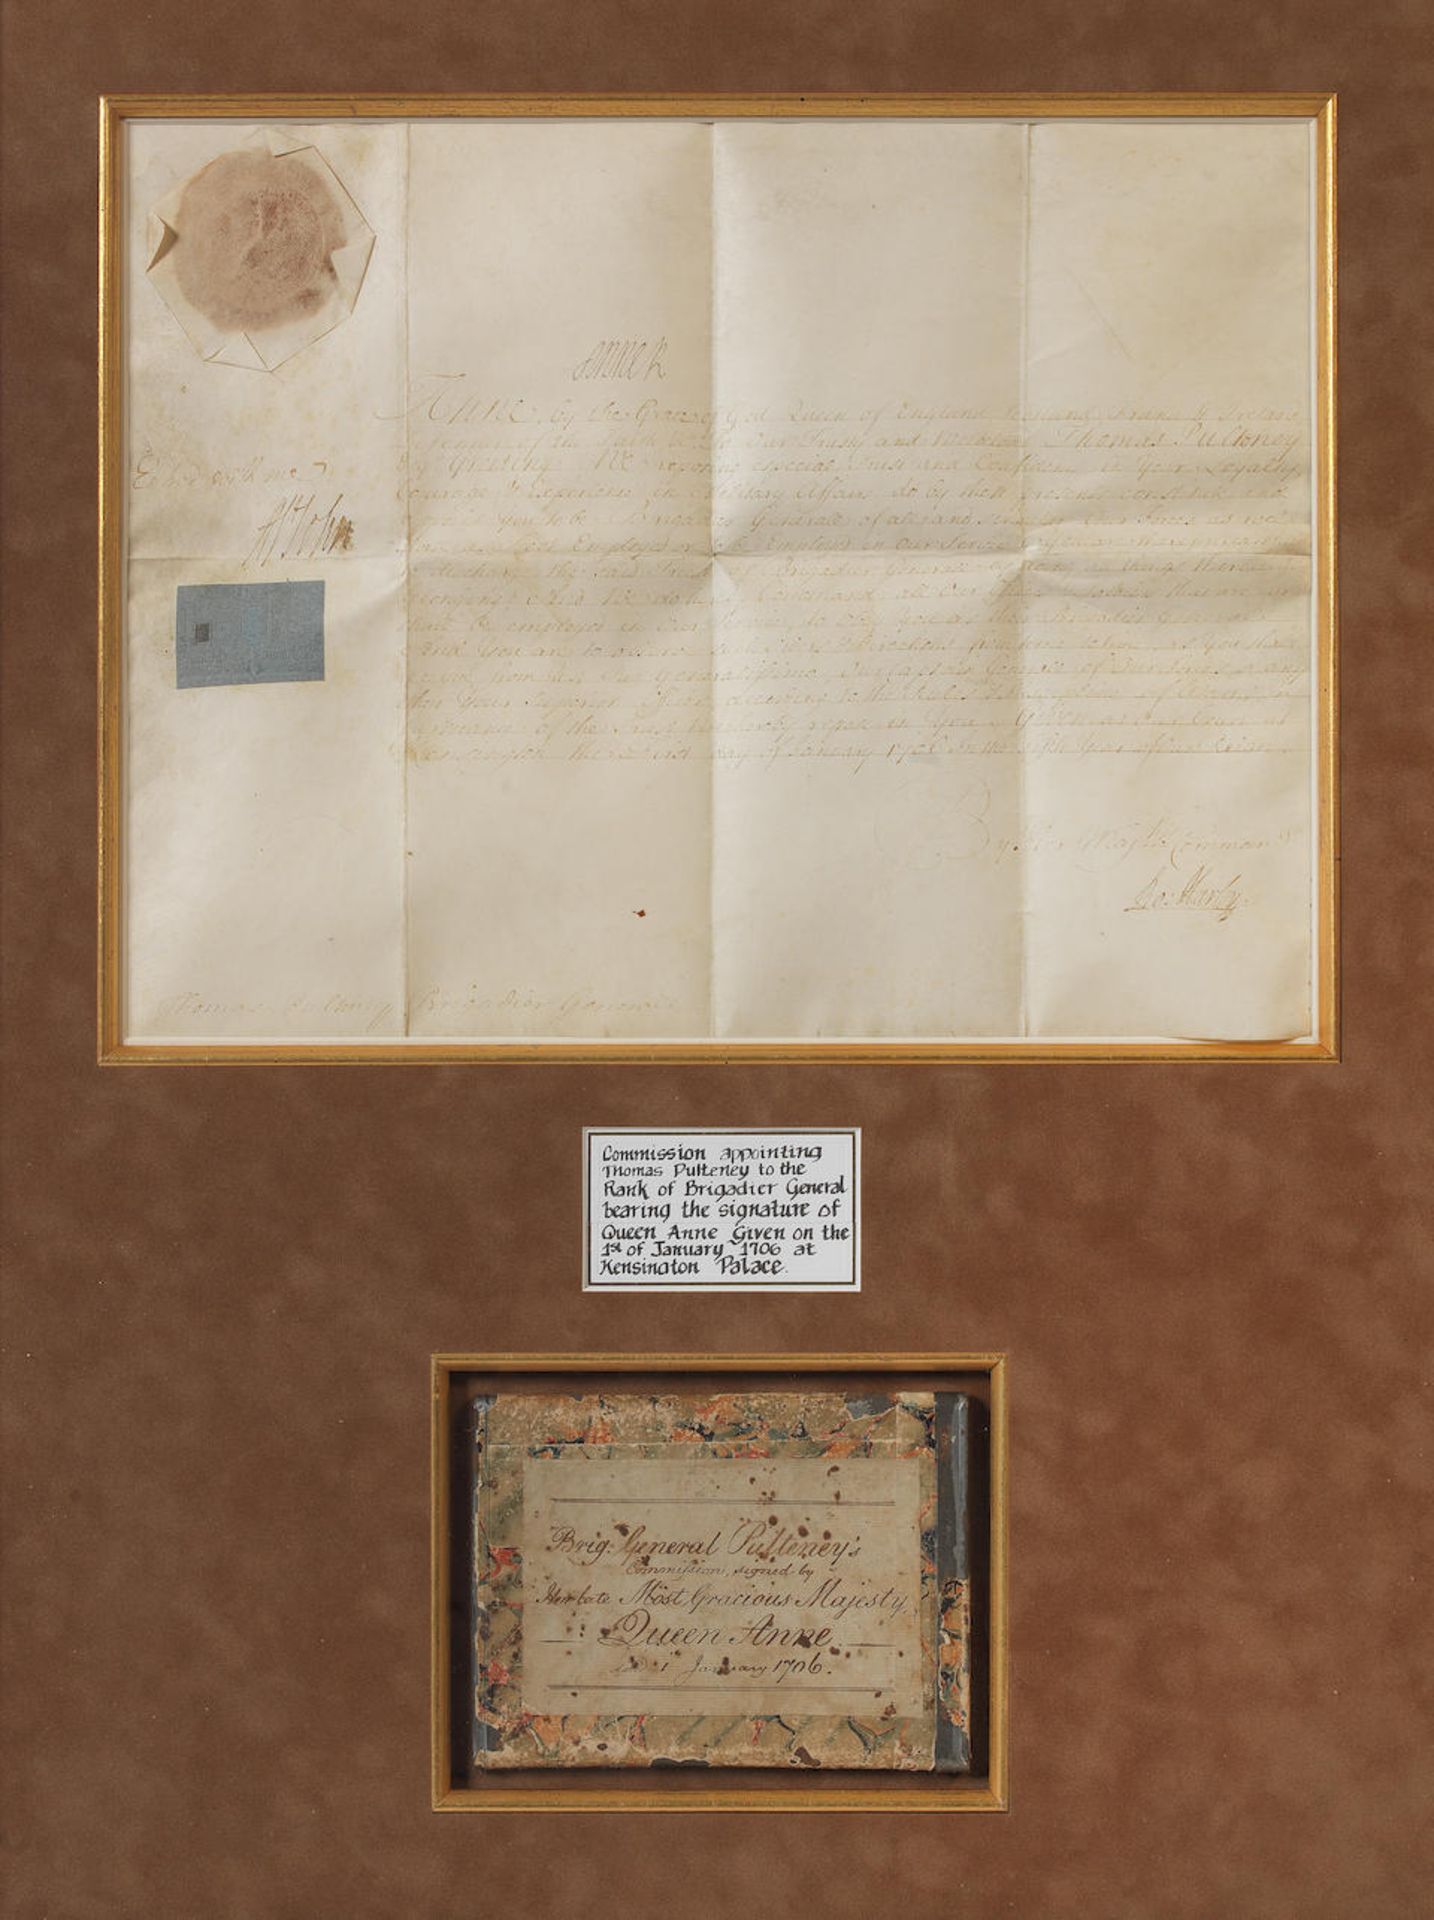 A Queen Anne Period Officer's Commission To Thomas Pulteney Appointing Him To The Rank Of Brigad...